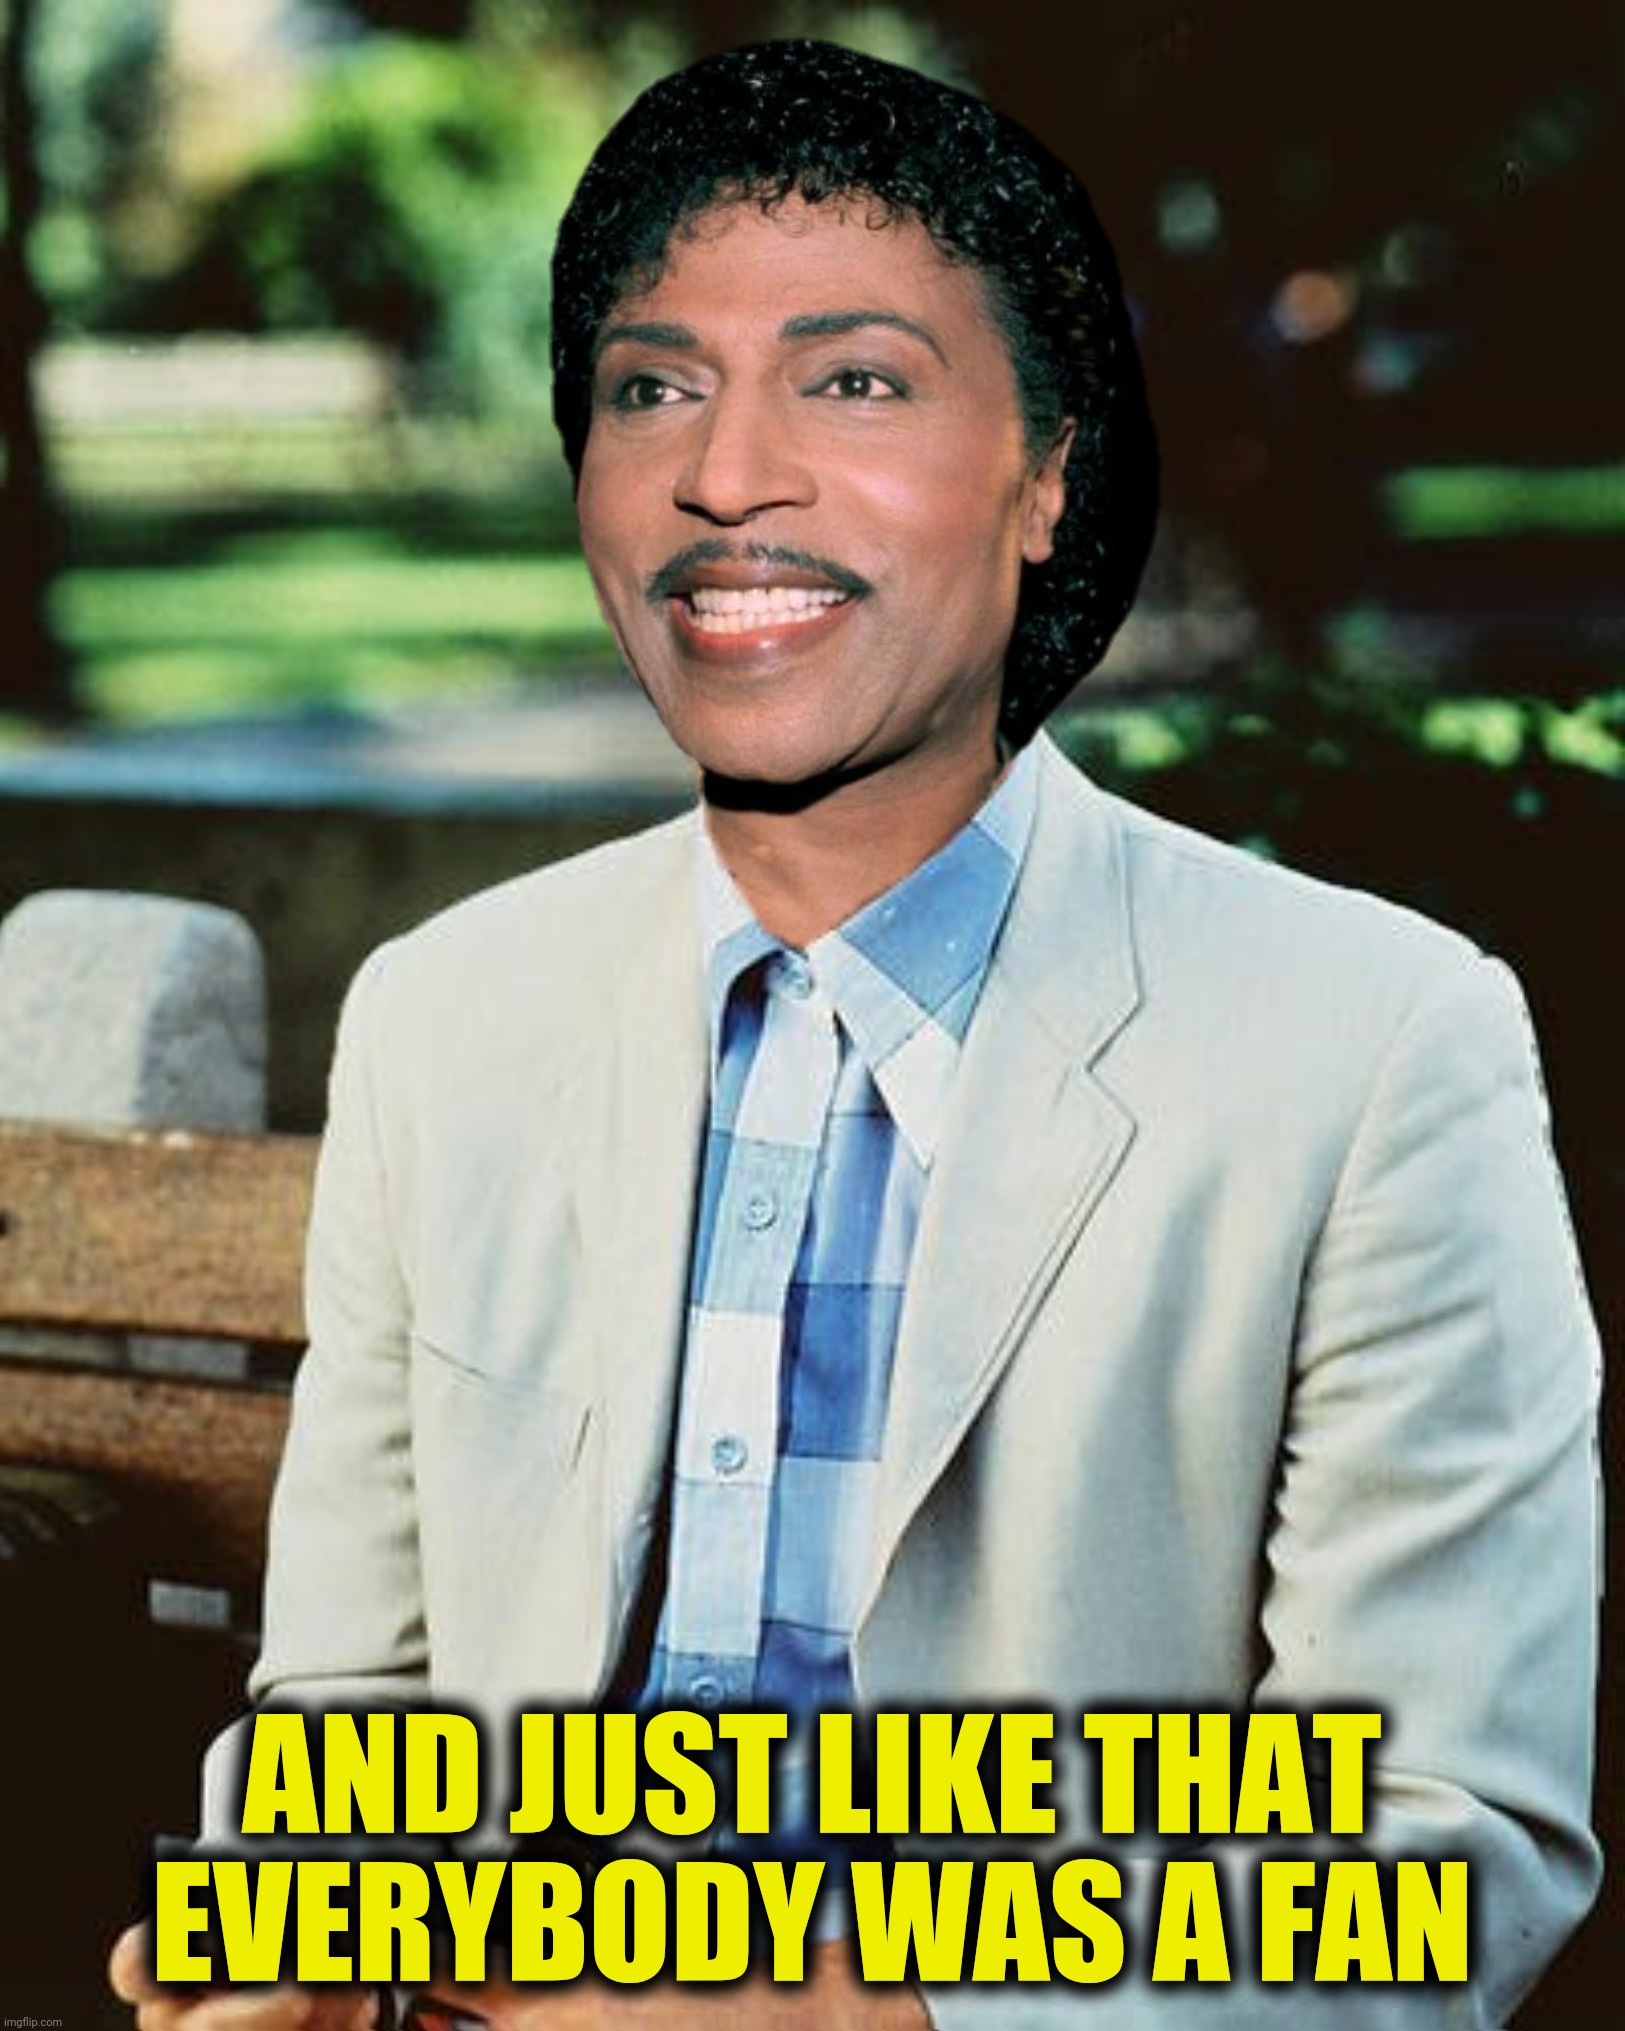 Rock, Forrest, rock!  A submission suggested by NewfoundlandMan | AND JUST LIKE THAT EVERYBODY WAS A FAN | image tagged in bad photoshop,little richard,forrest gump | made w/ Imgflip meme maker